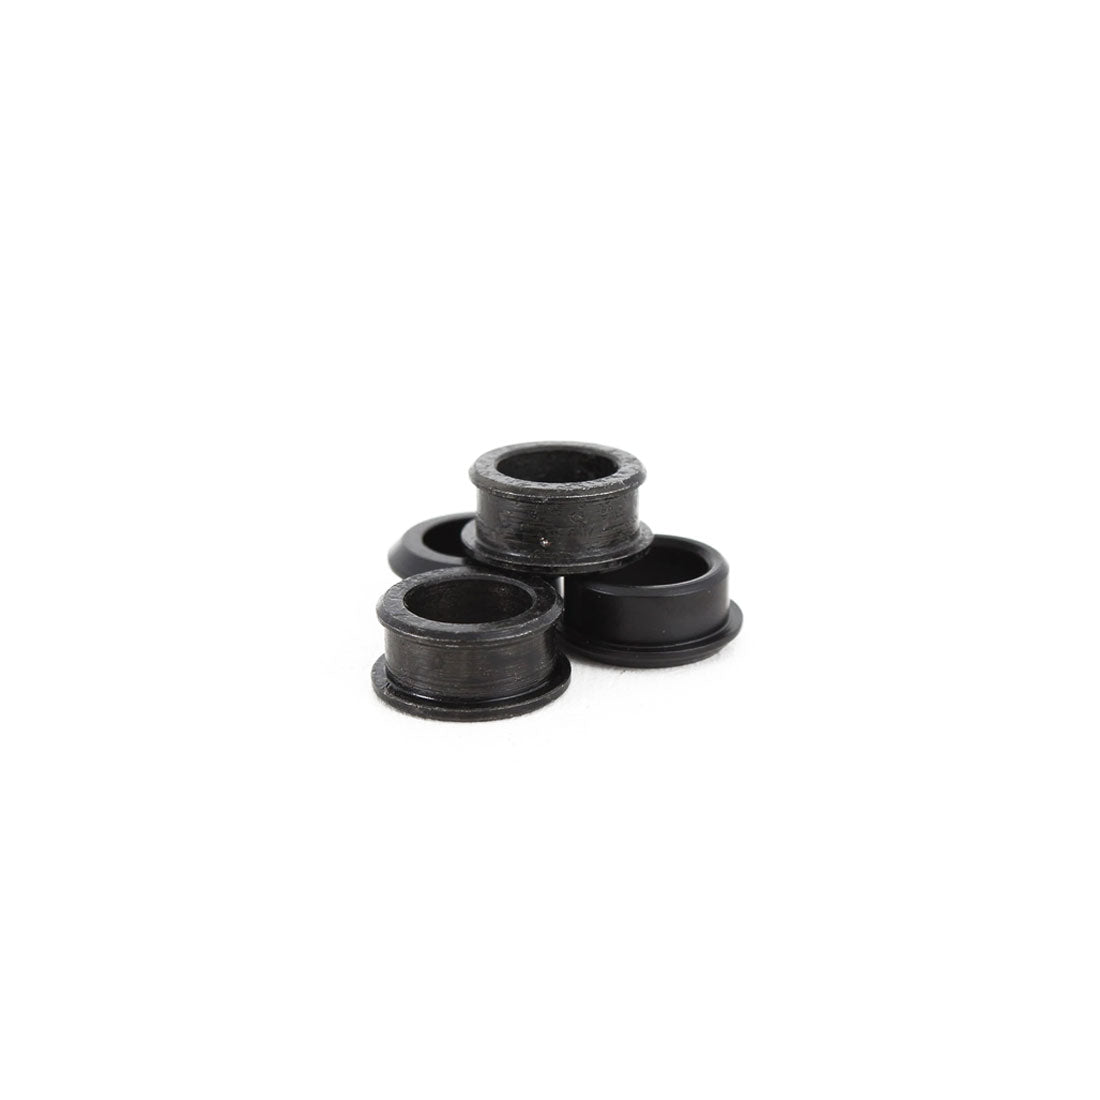 Envy 28mm Wheel Spacers 4pk Scooter Hardware and Parts